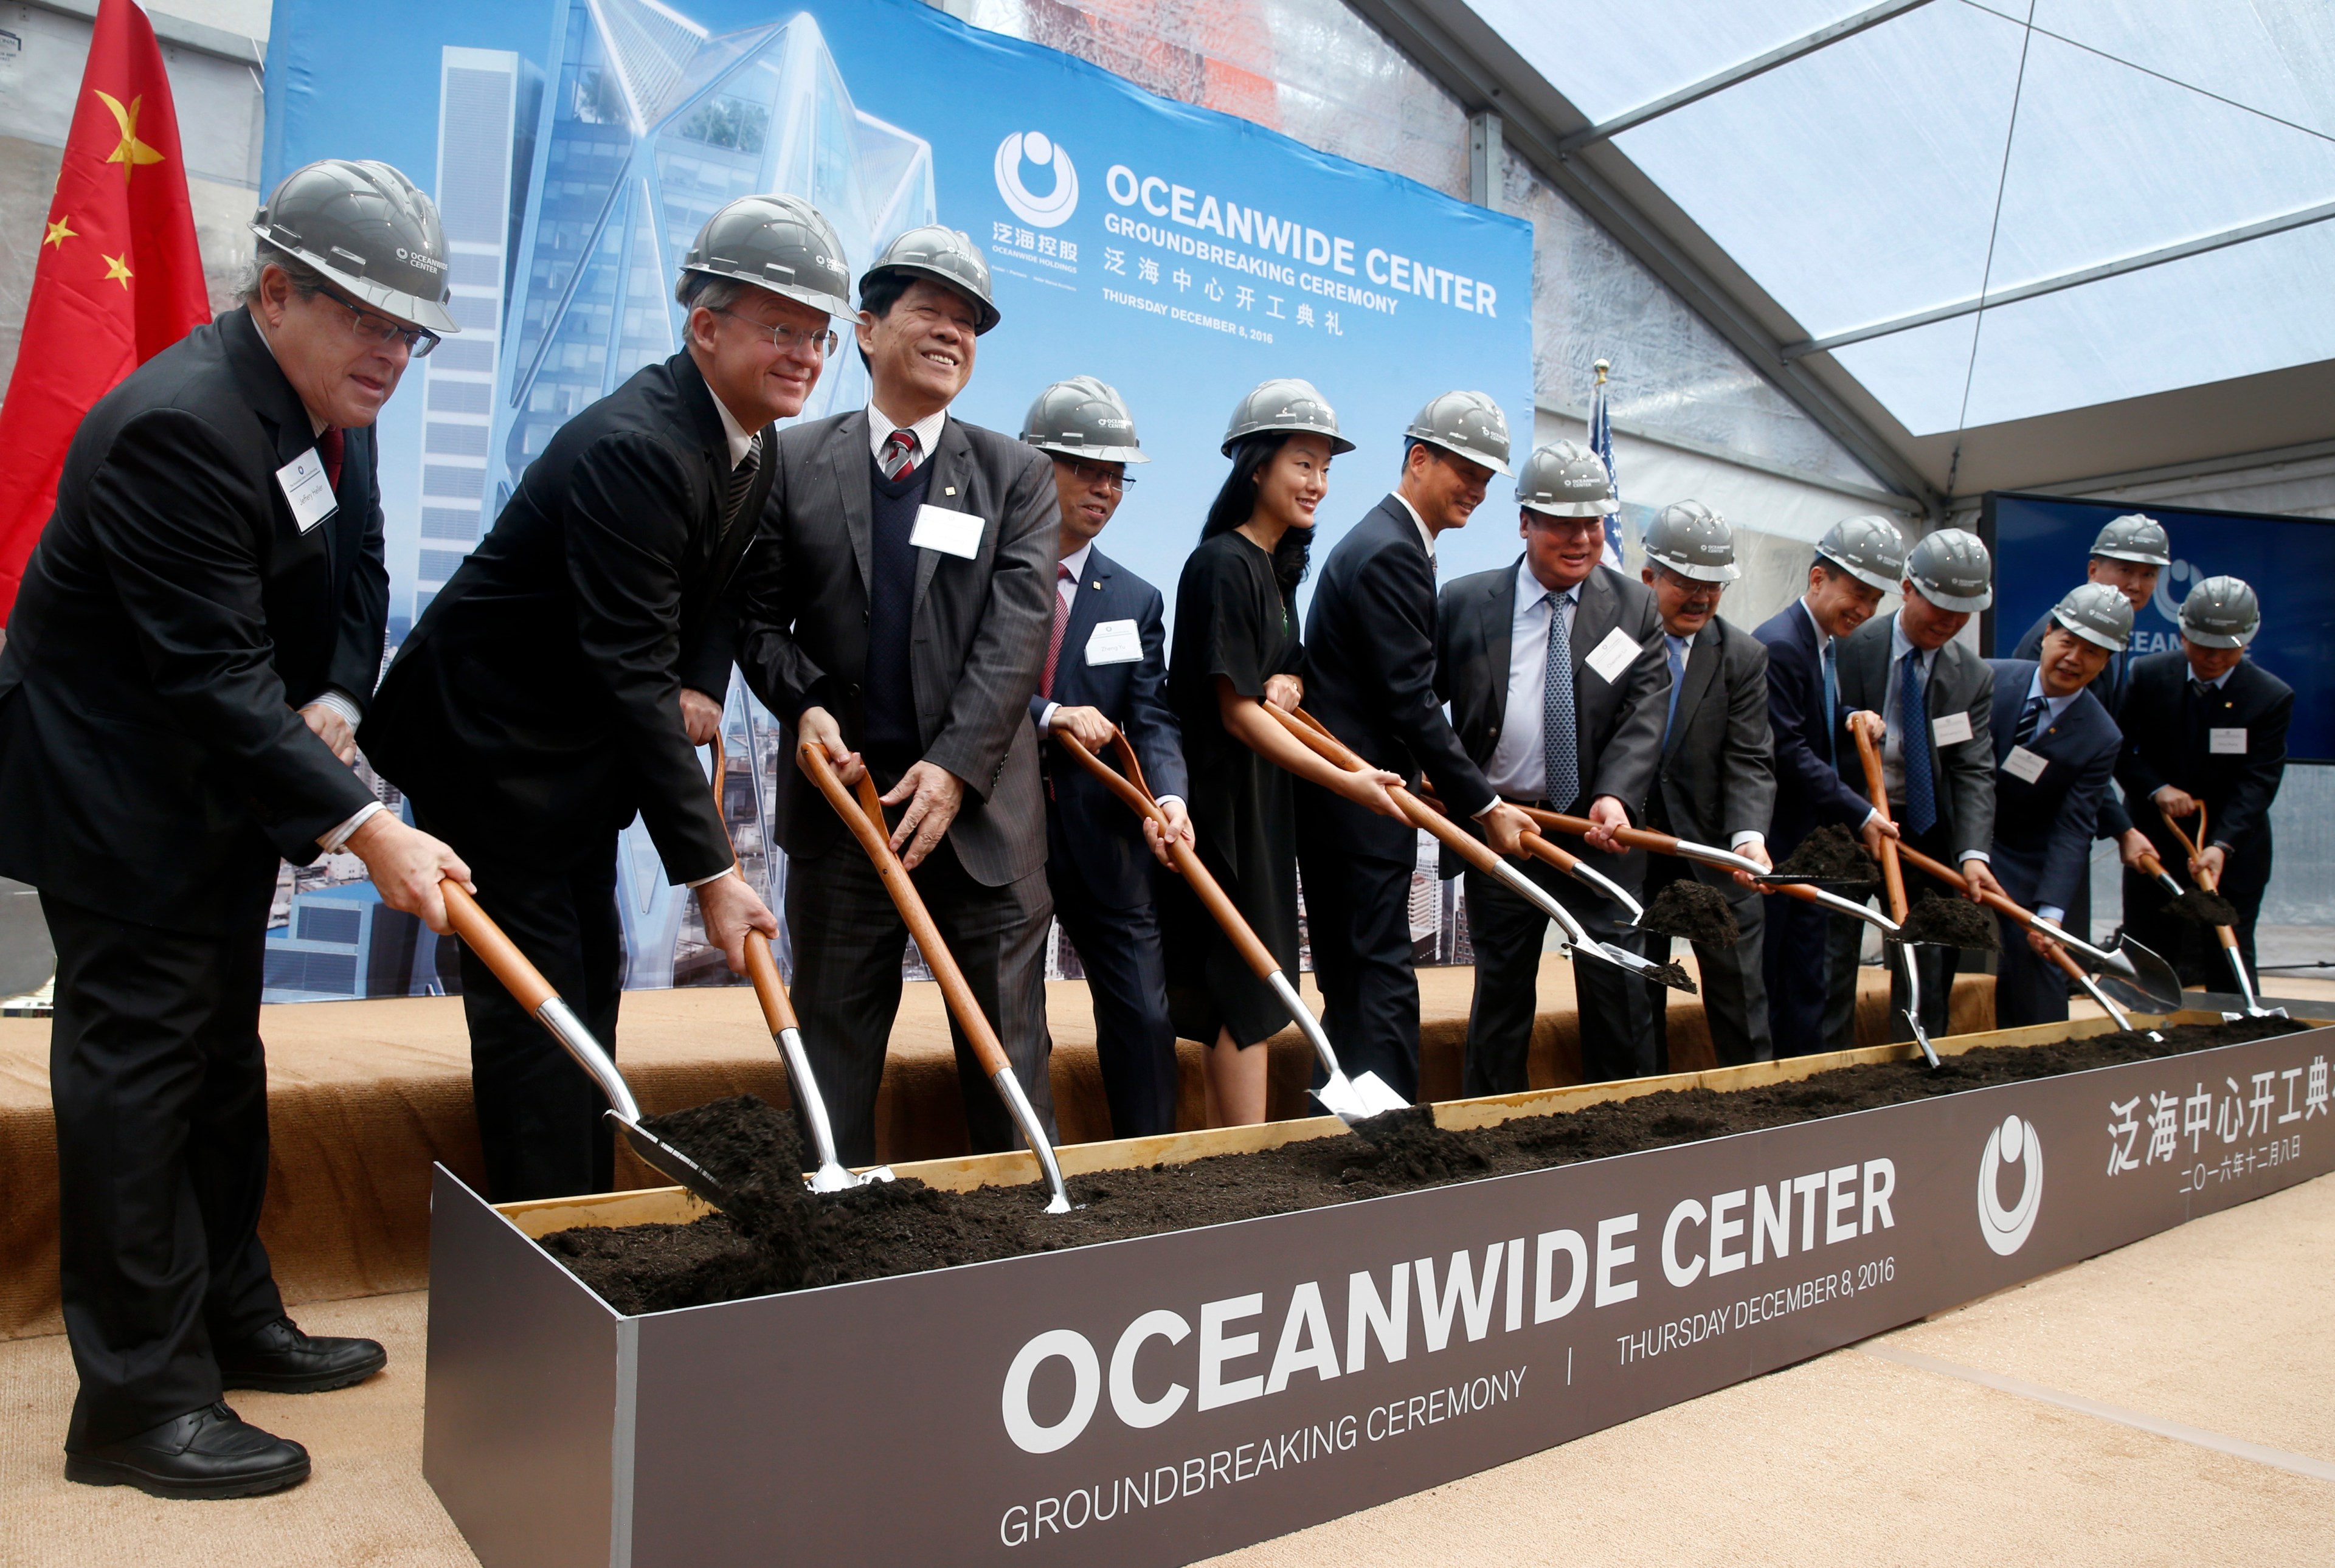 Group of people in suits and hard hats at a ceremonial groundbreaking.